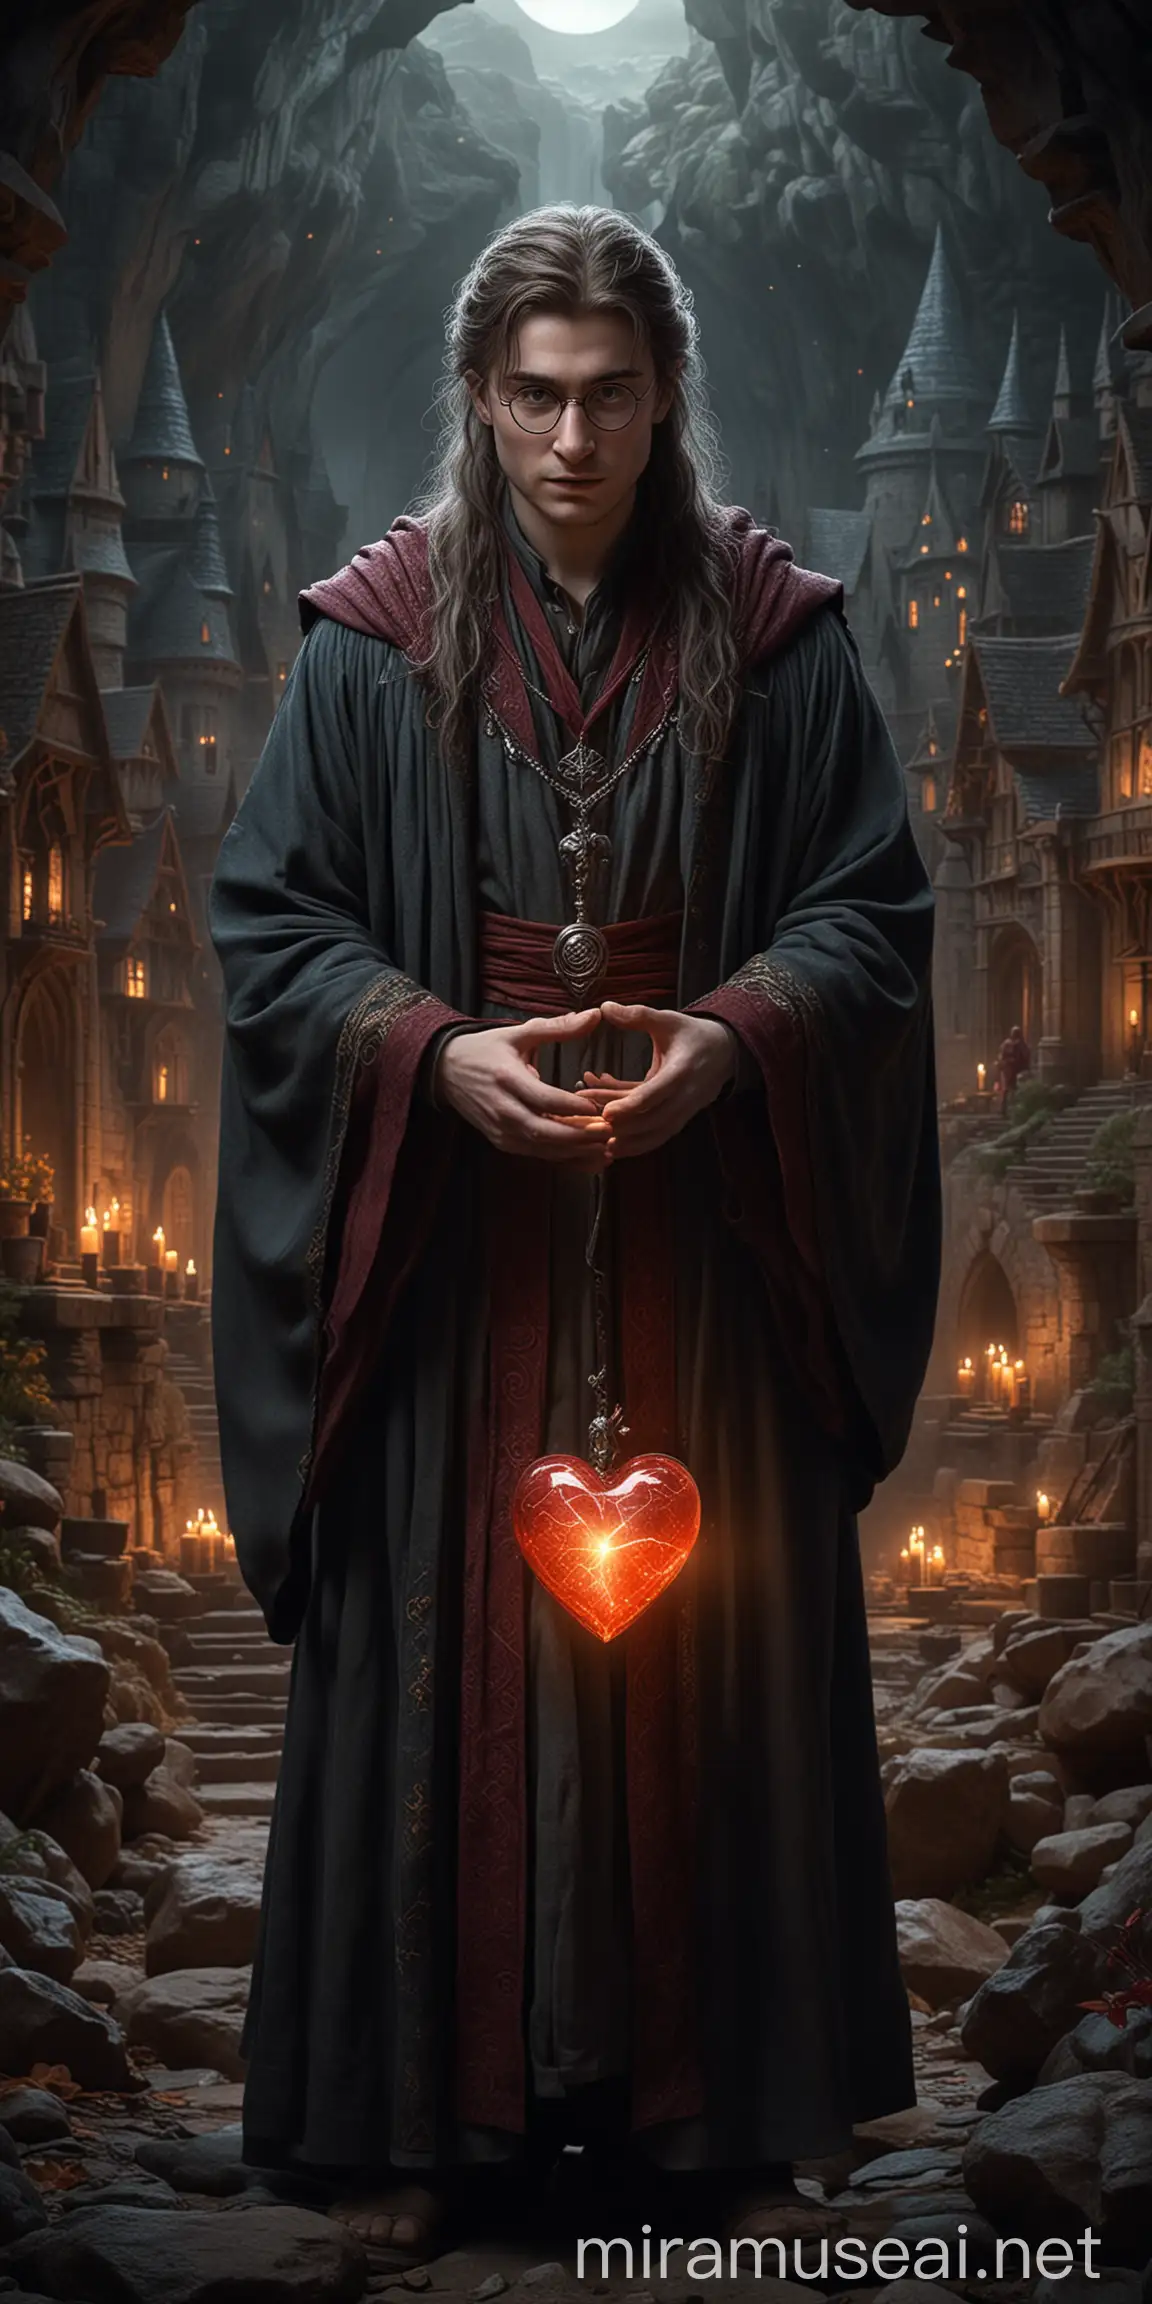 The main character of the image is the wizard Harry Potter, holding a human heart in his hands. This wizard is depicted with distinct facial features and a sense of fantasy and magic.
The background of the image is the mythical kingdom from Game of Thrones with elements of the House of the Dragon. This setting enhances the mystical atmosphere, combining ancient architecture and dramatic landscapes.
The background is rich in detail: rugged mountains, cascading dragonfalls and ancient ruins are shrouded in a magical twilight glow. These elements create a charming and mysterious atmosphere for the scene. The style is visual and fantastical, with bright colors highlighting the wizard's robe and the heart he holds, contrasting with the darker and muted tones of the background. This color scheme highlights the central figure and creates visual interest. The wizard is in a contemplative pose, tenderly clutching a glowing human heart that emits a soft, ethereal red light, adding depth to the image's narrative. The wizard's costume features an intricate Game of Thrones robe adorned with mystical symbols and patterns that enhance his magical aura. His appearance is charismatic and mysterious, captivating viewers into a fantasy world.
In addition to a human heart, the wizard carries a wand with him, which further emphasizes his magical prowess and adds a touch of authenticity to his character.